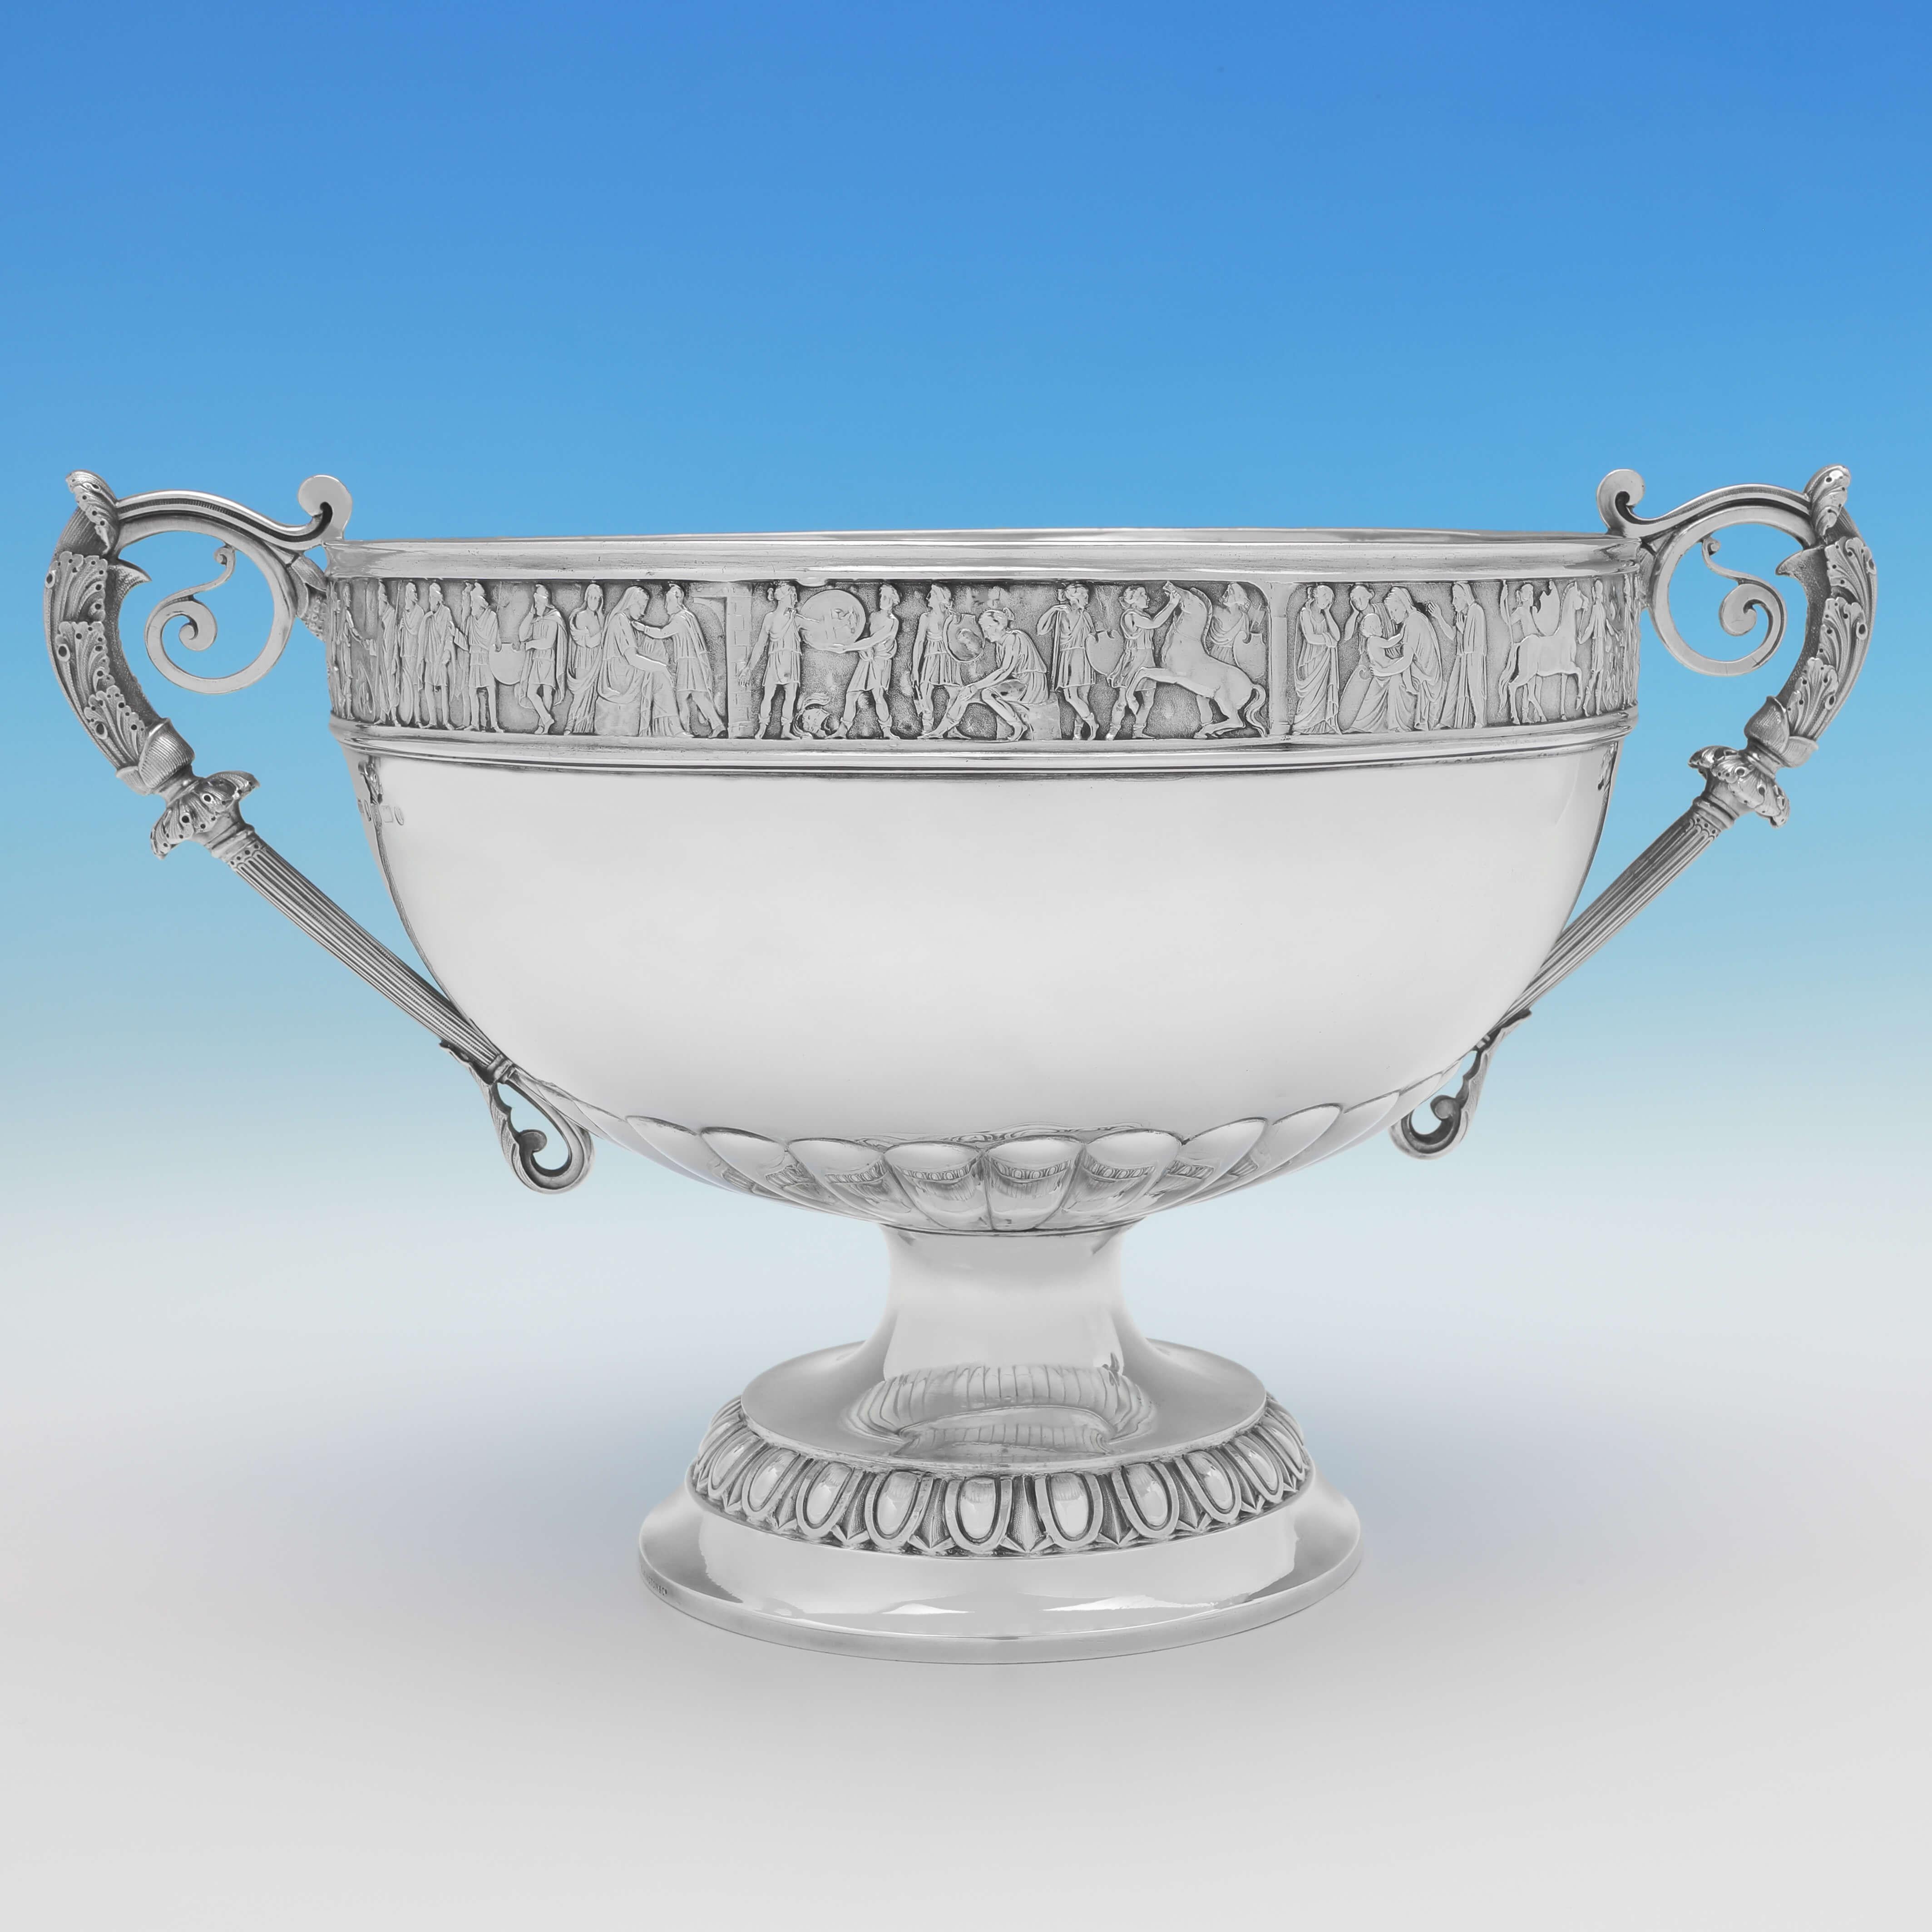 Hallmarked in Birmingham in 1887 by Elkington & Co., this striking, Victorian, antique sterling silver bowl, stands on a pedestal foot, and features acanthus detailed handles, and a border modelled as a classical Roman frieze. The bowl measures